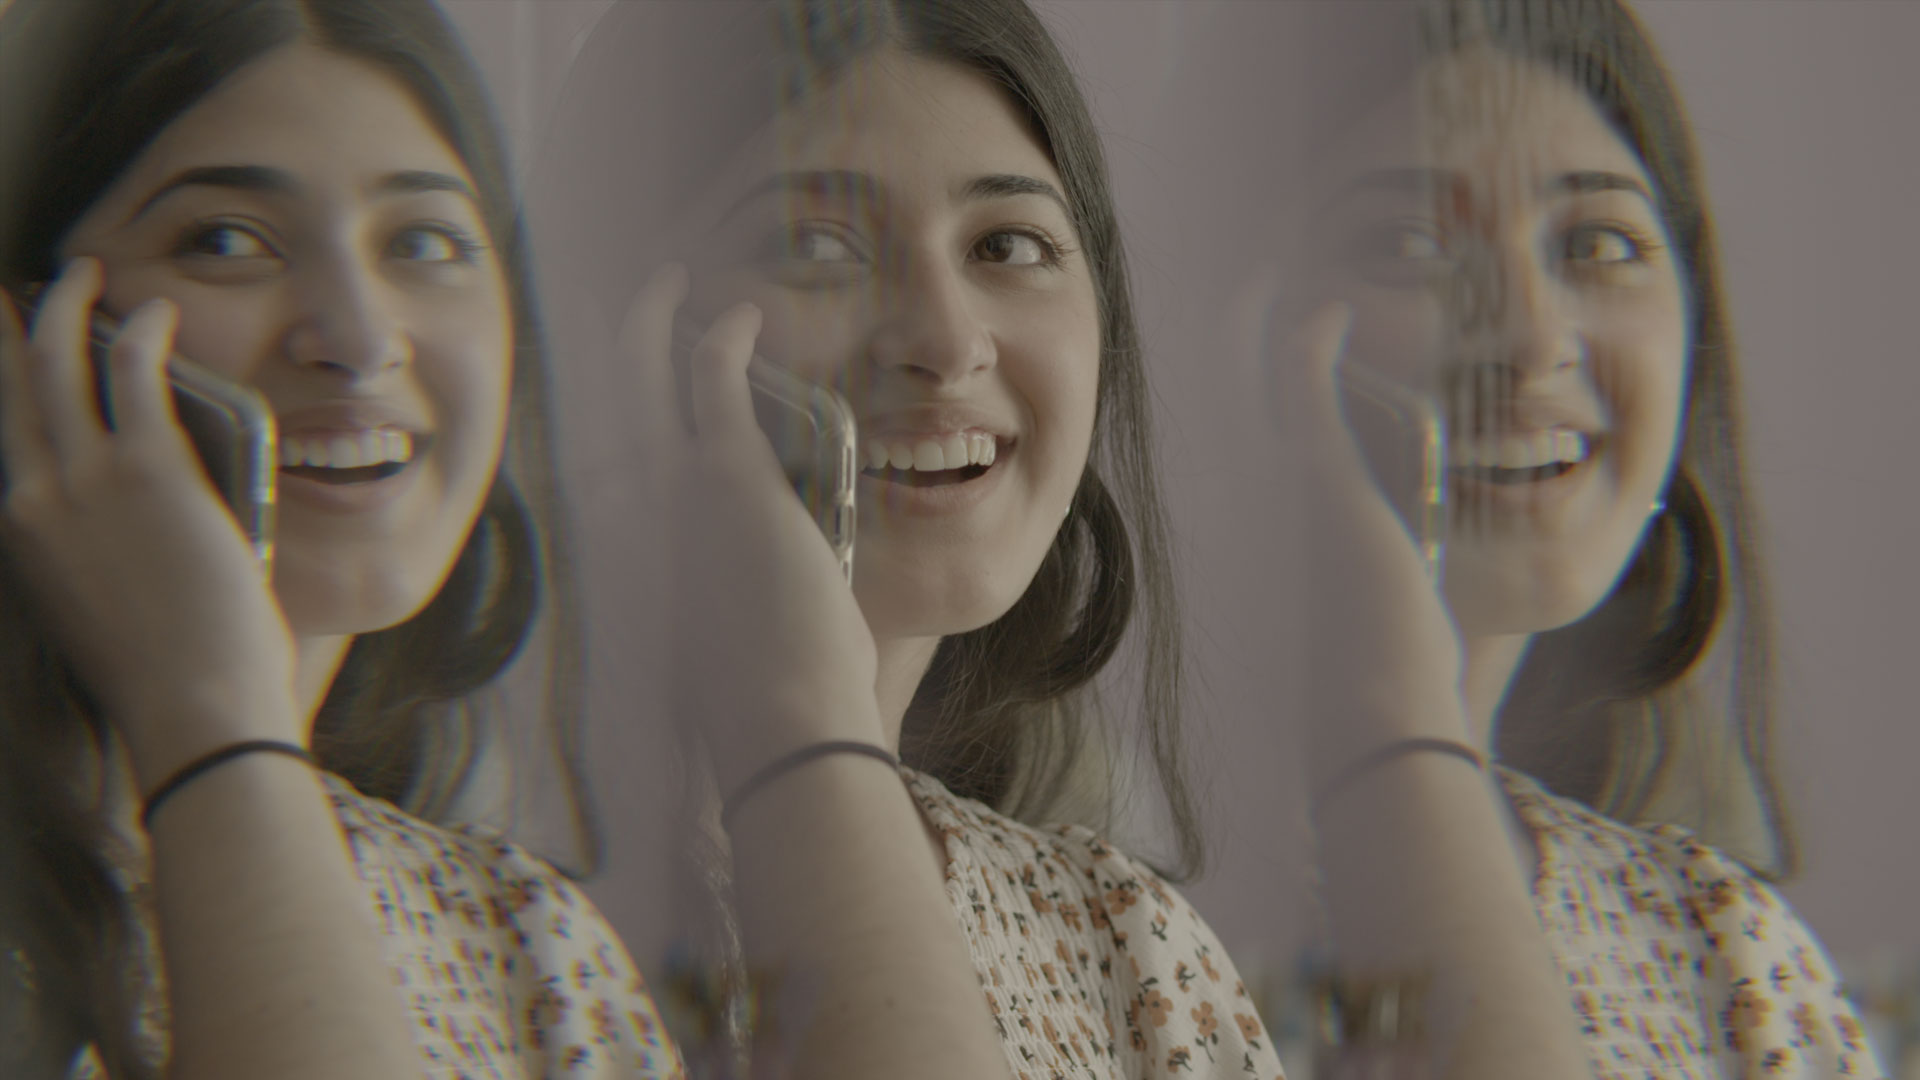 Image from film "TikTok, Boom," showing a triple-reflected image of a young smiling South Asian woman talking on a cellphone